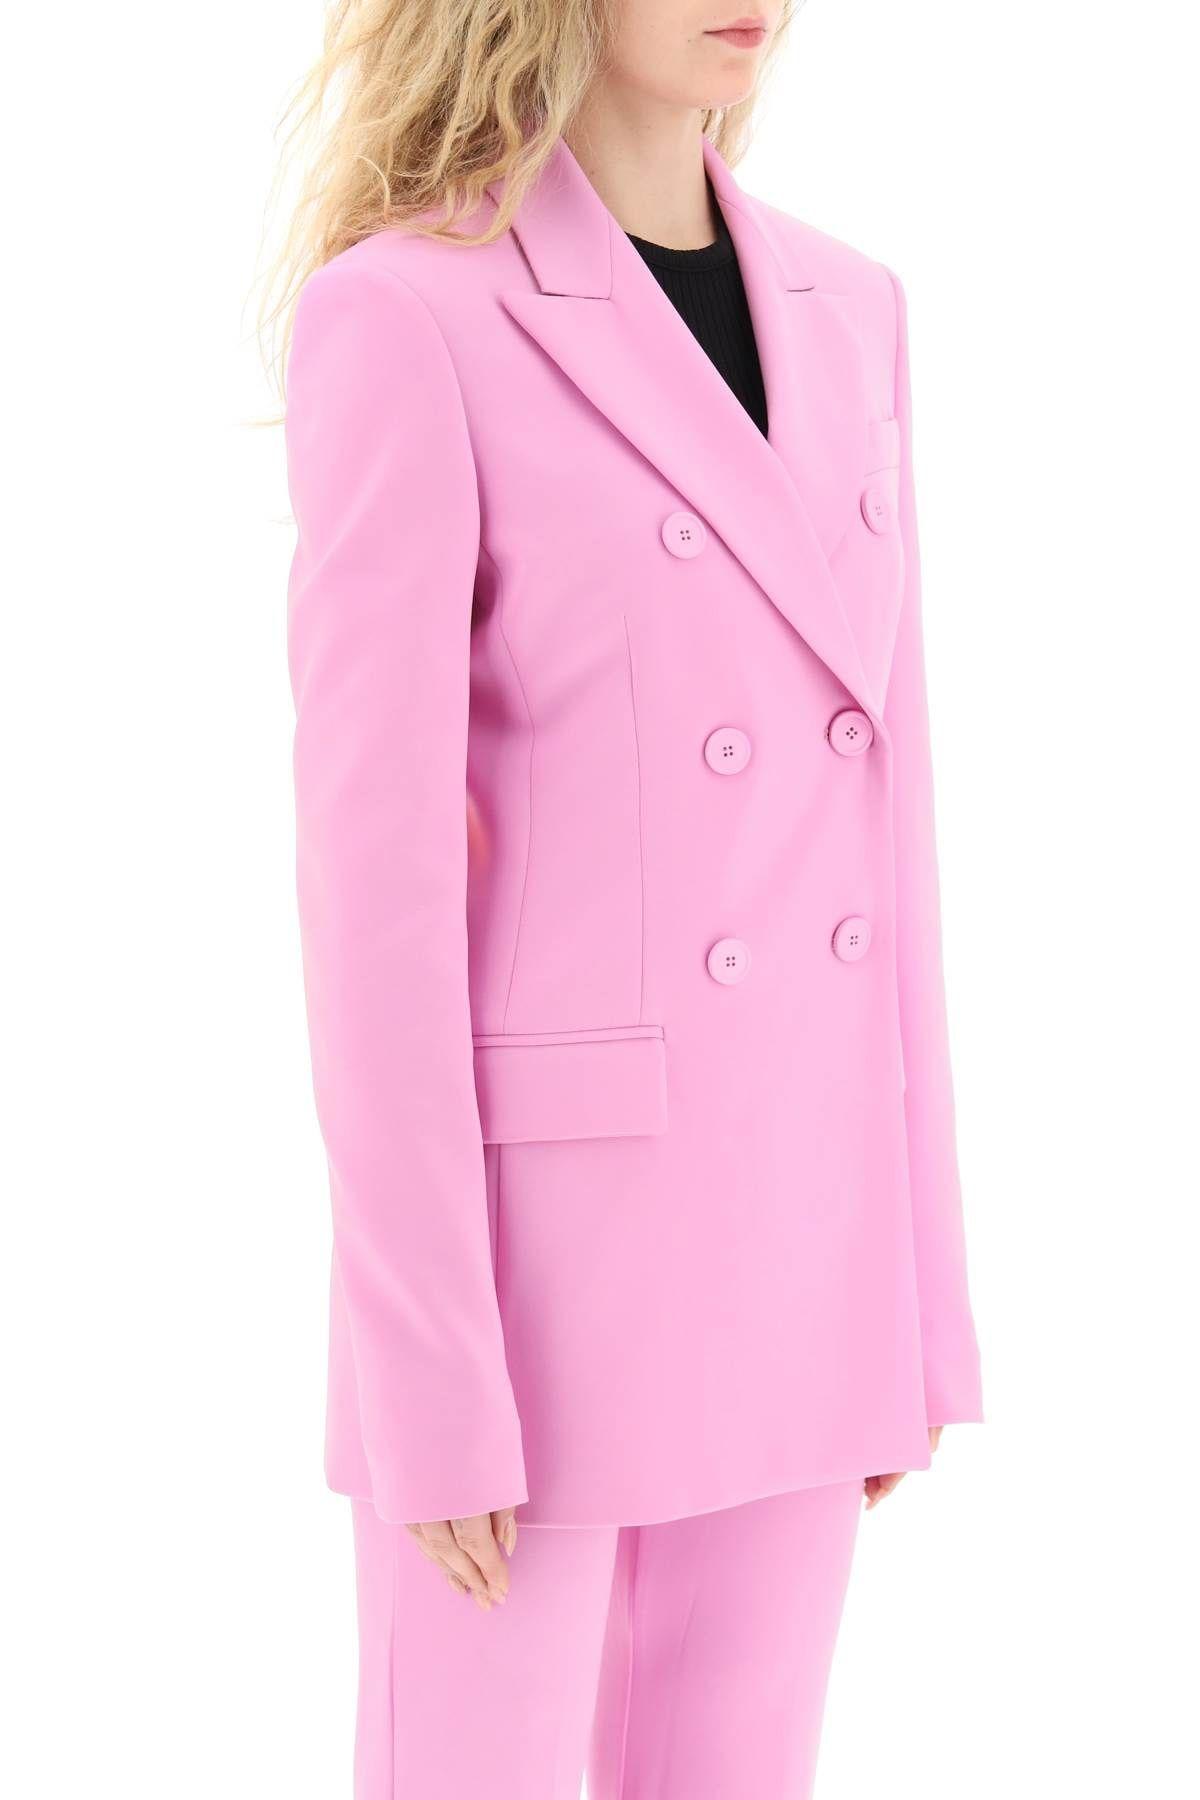 Shop Sportmax Stretch Jersey Double-breasted Blazer In Rosa Baby